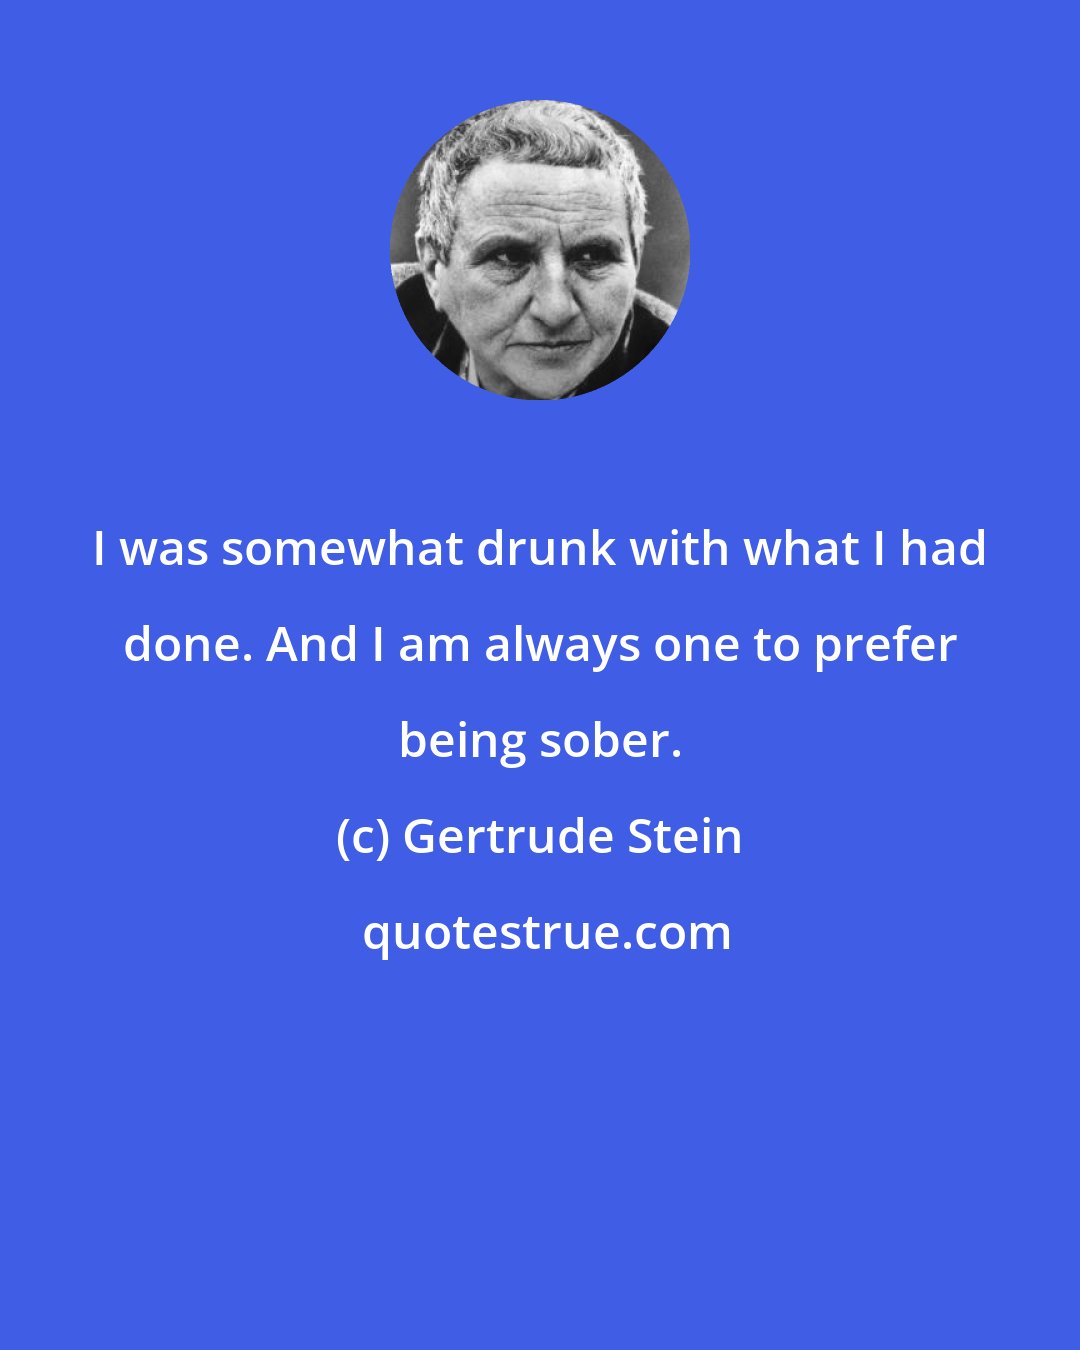 Gertrude Stein: I was somewhat drunk with what I had done. And I am always one to prefer being sober.